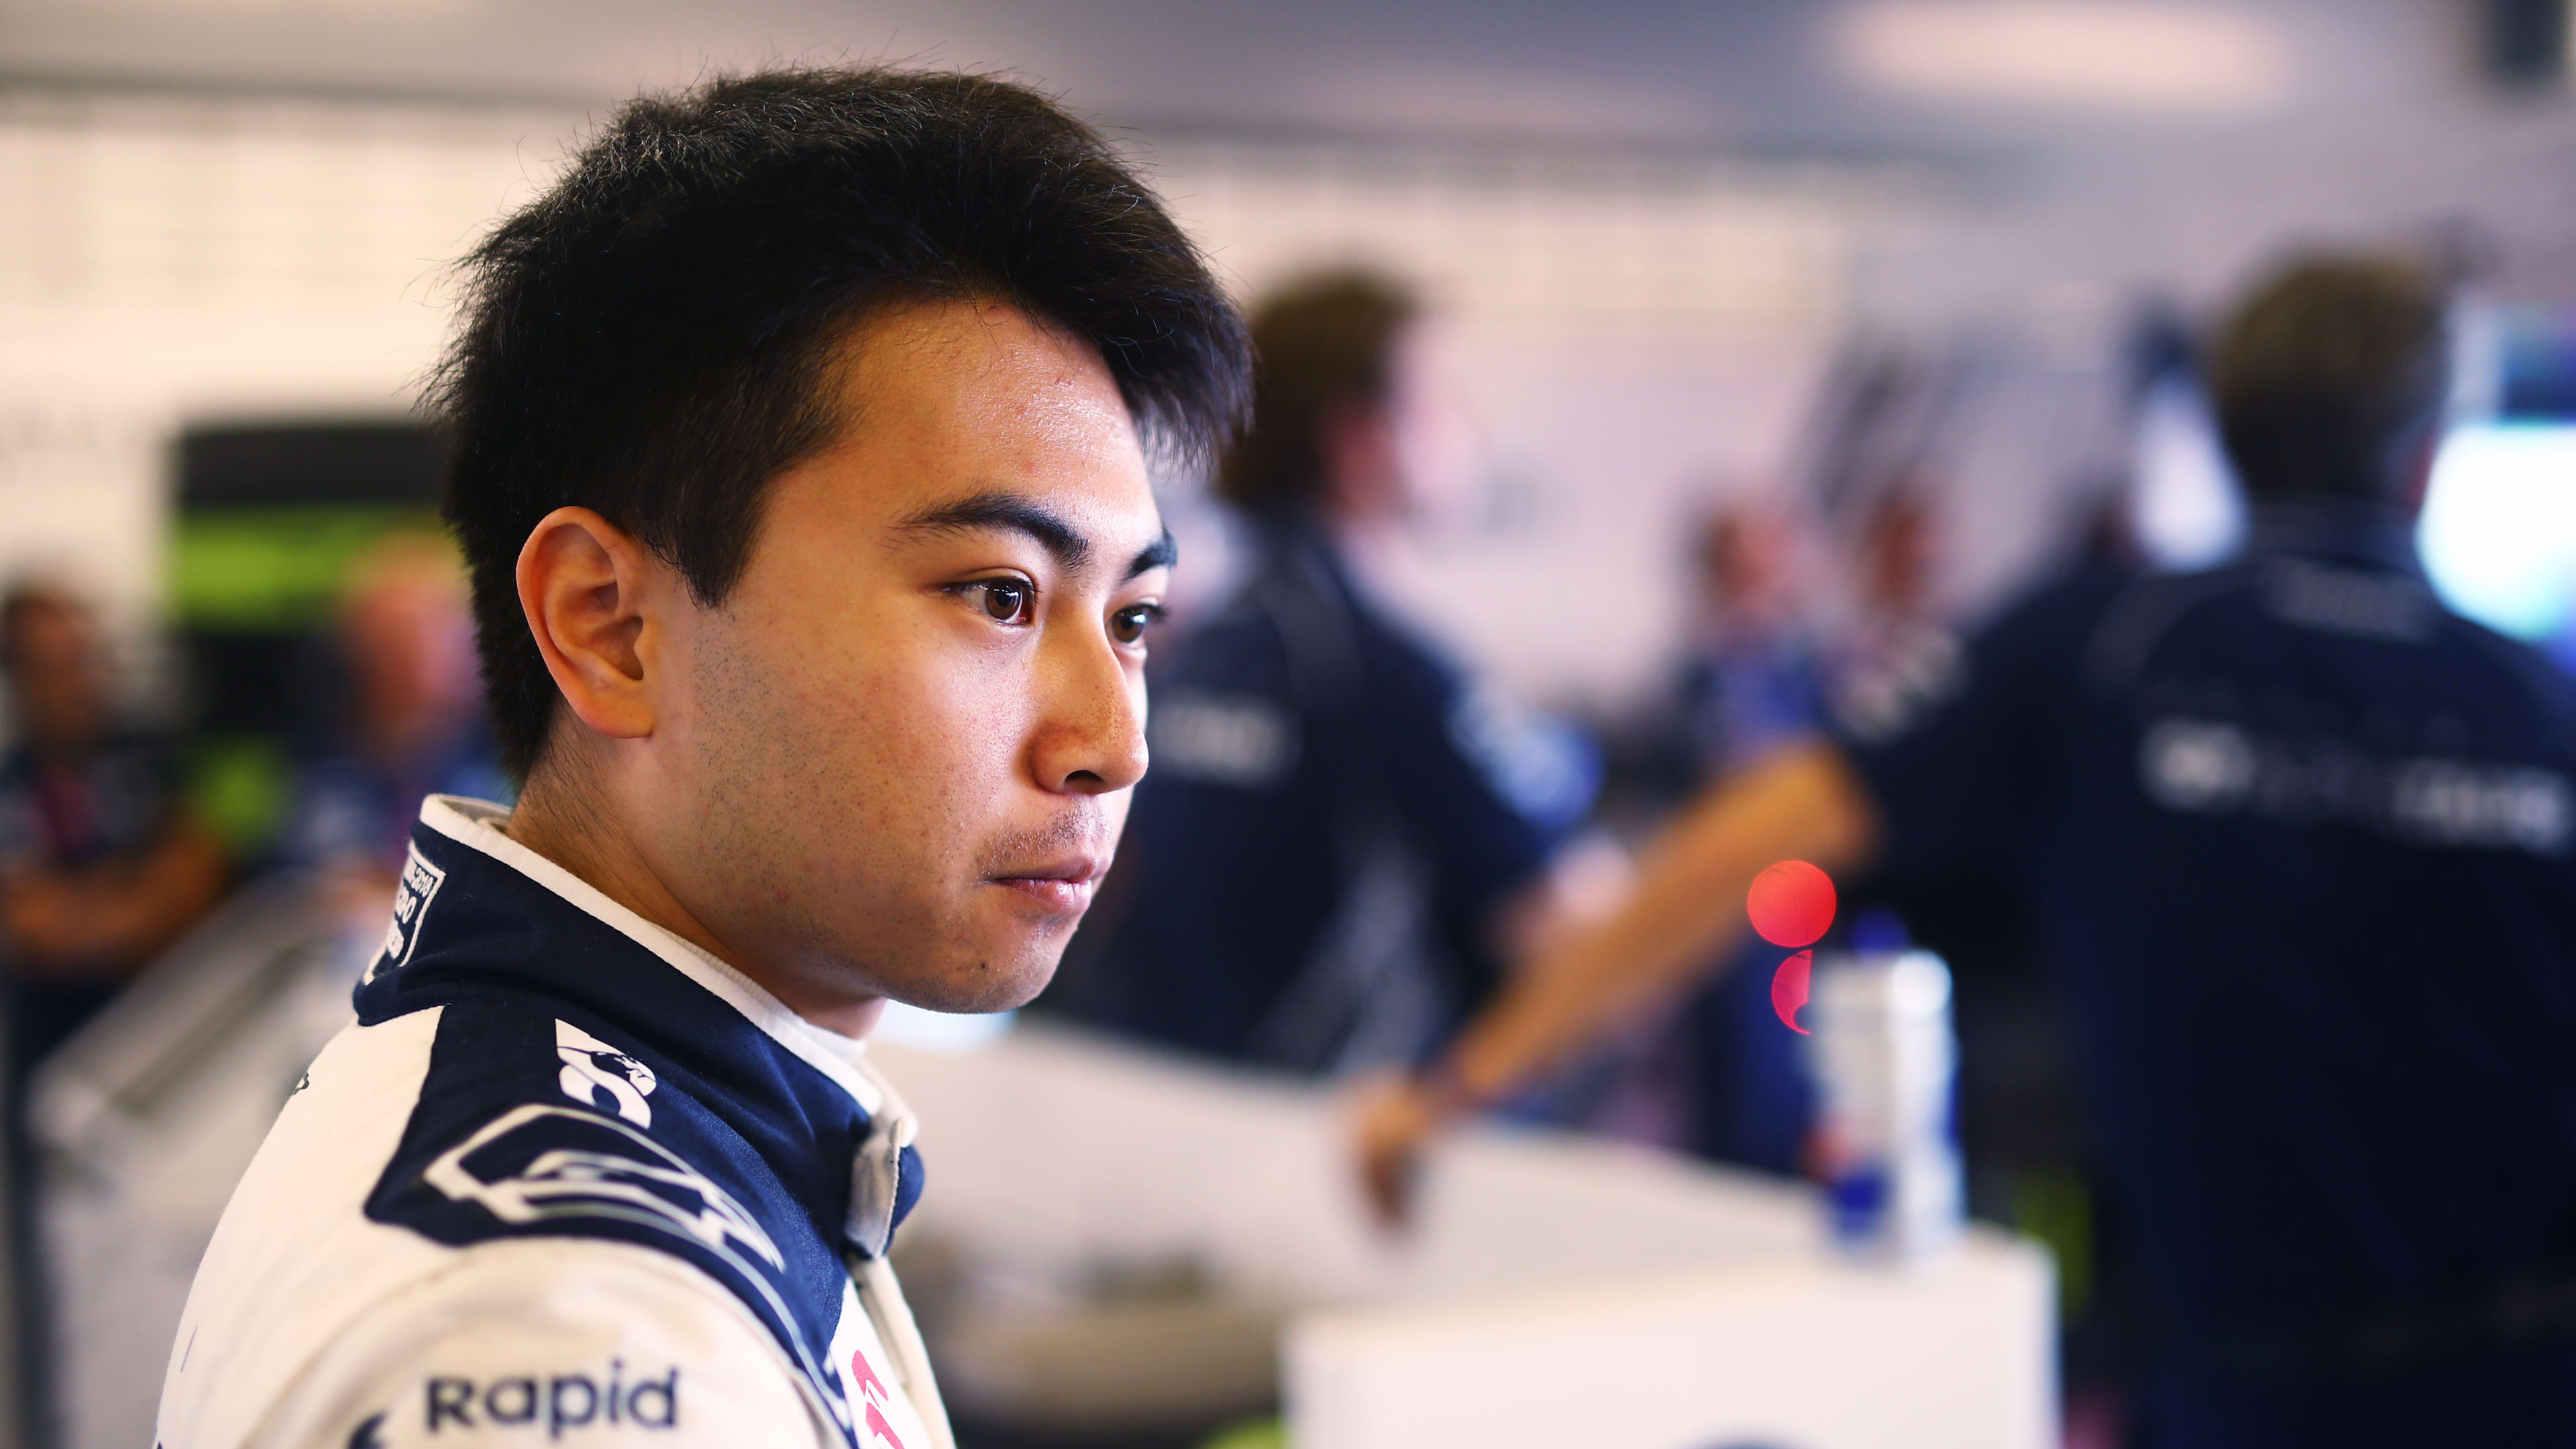 Red Bull-backed rising star Ayumu Iwasa to make F1 weekend debut with RB during practice at Japanese GP